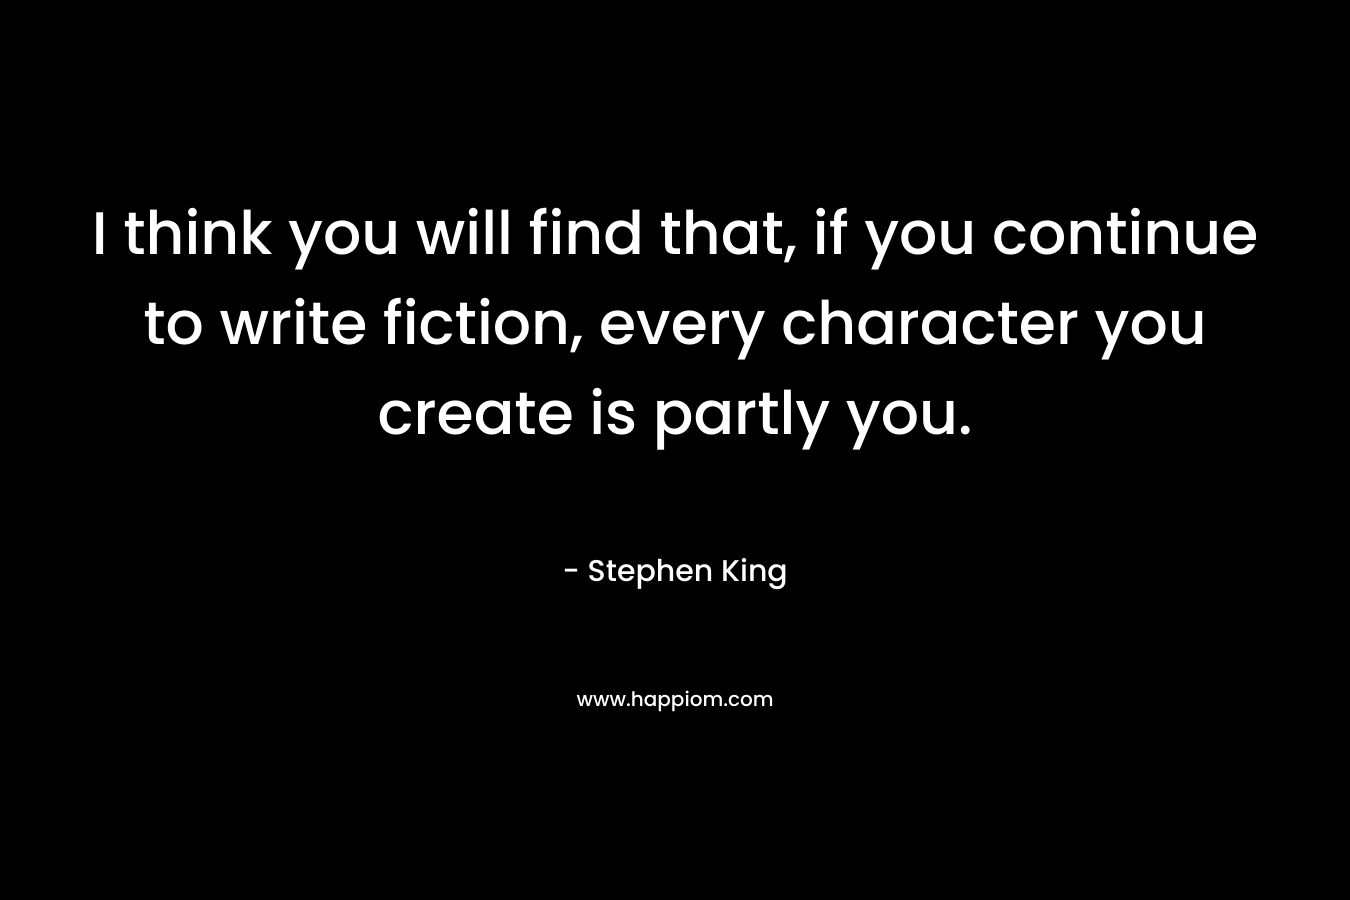 I think you will find that, if you continue to write fiction, every character you create is partly you. – Stephen King